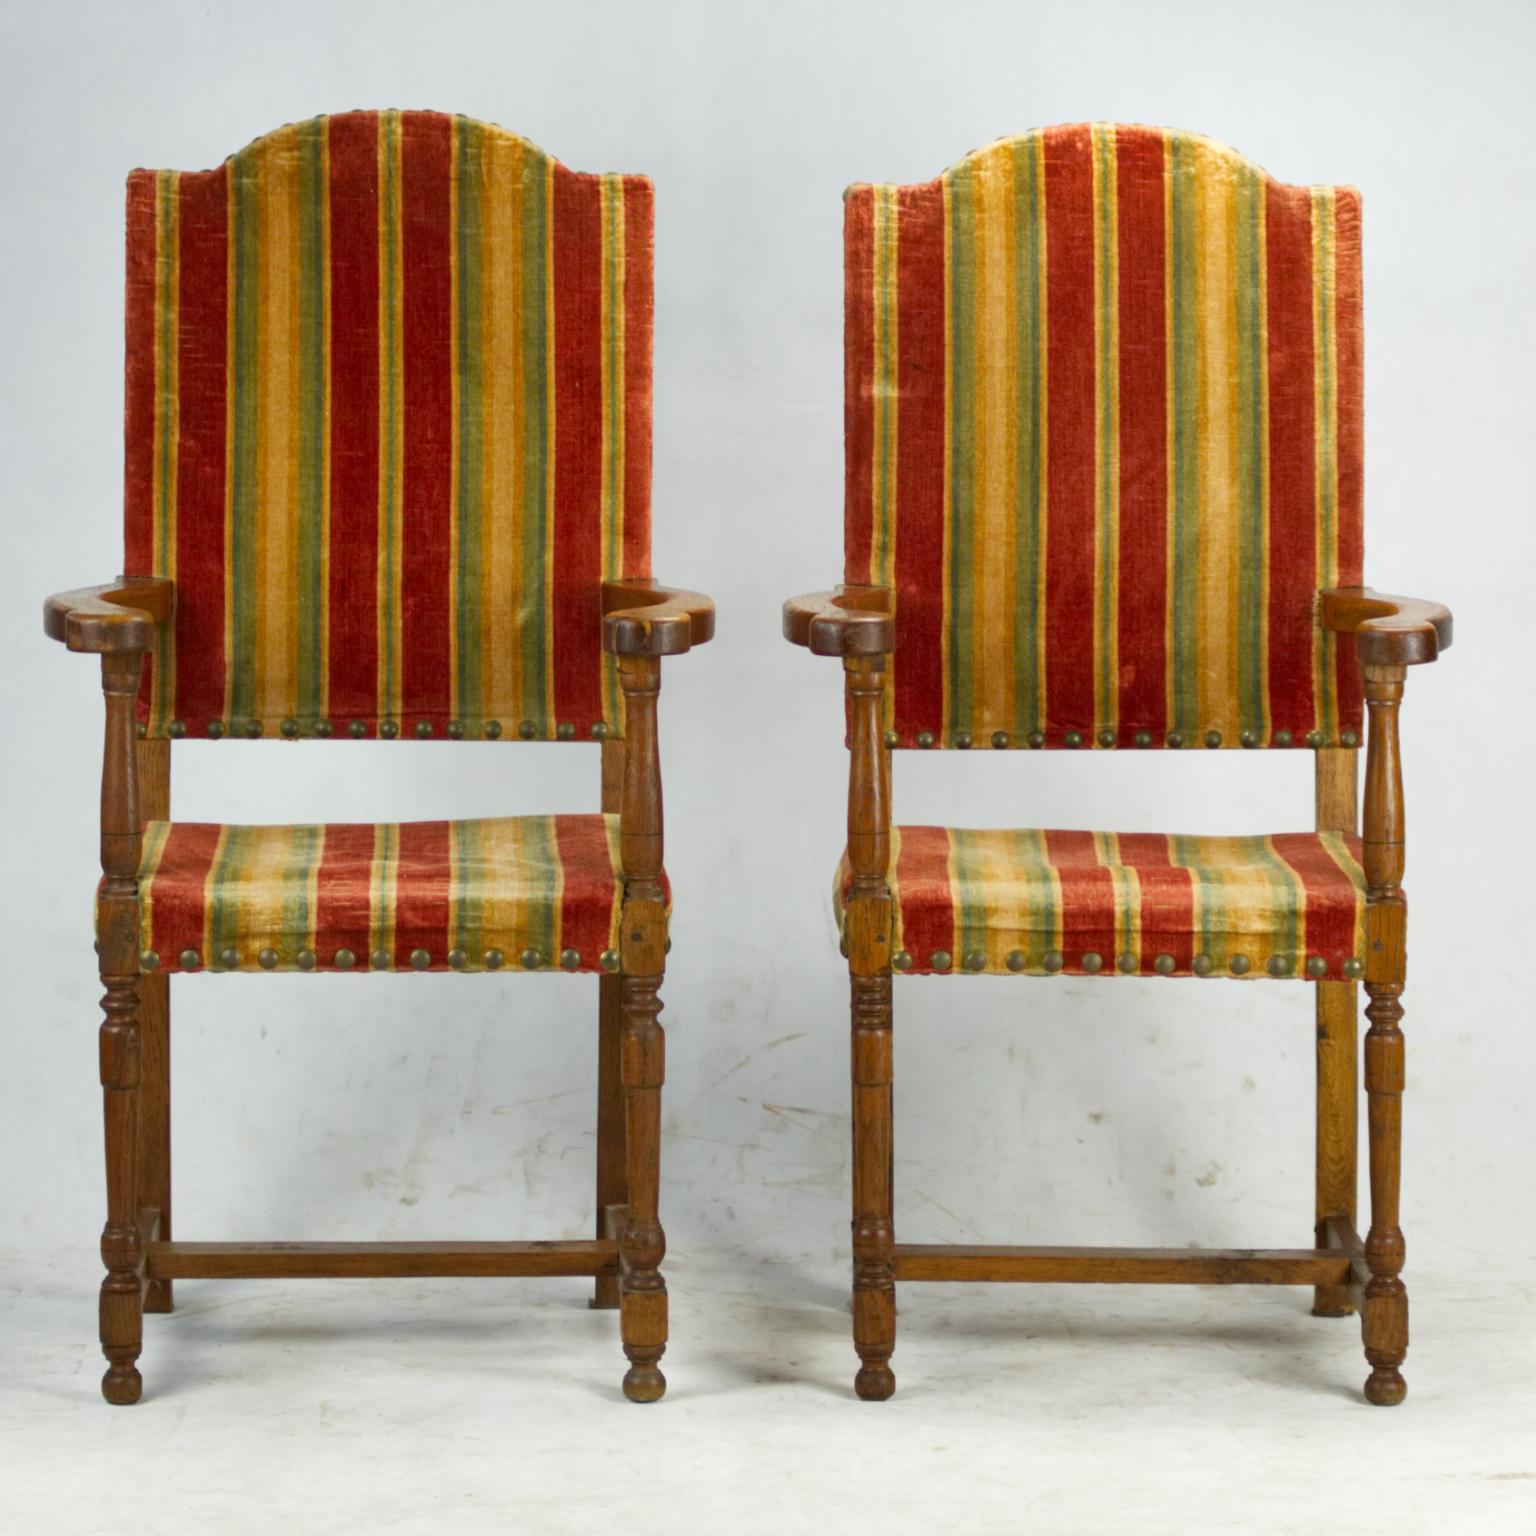 Pair of 18th century antique armchairs, upholstery is probably not original.